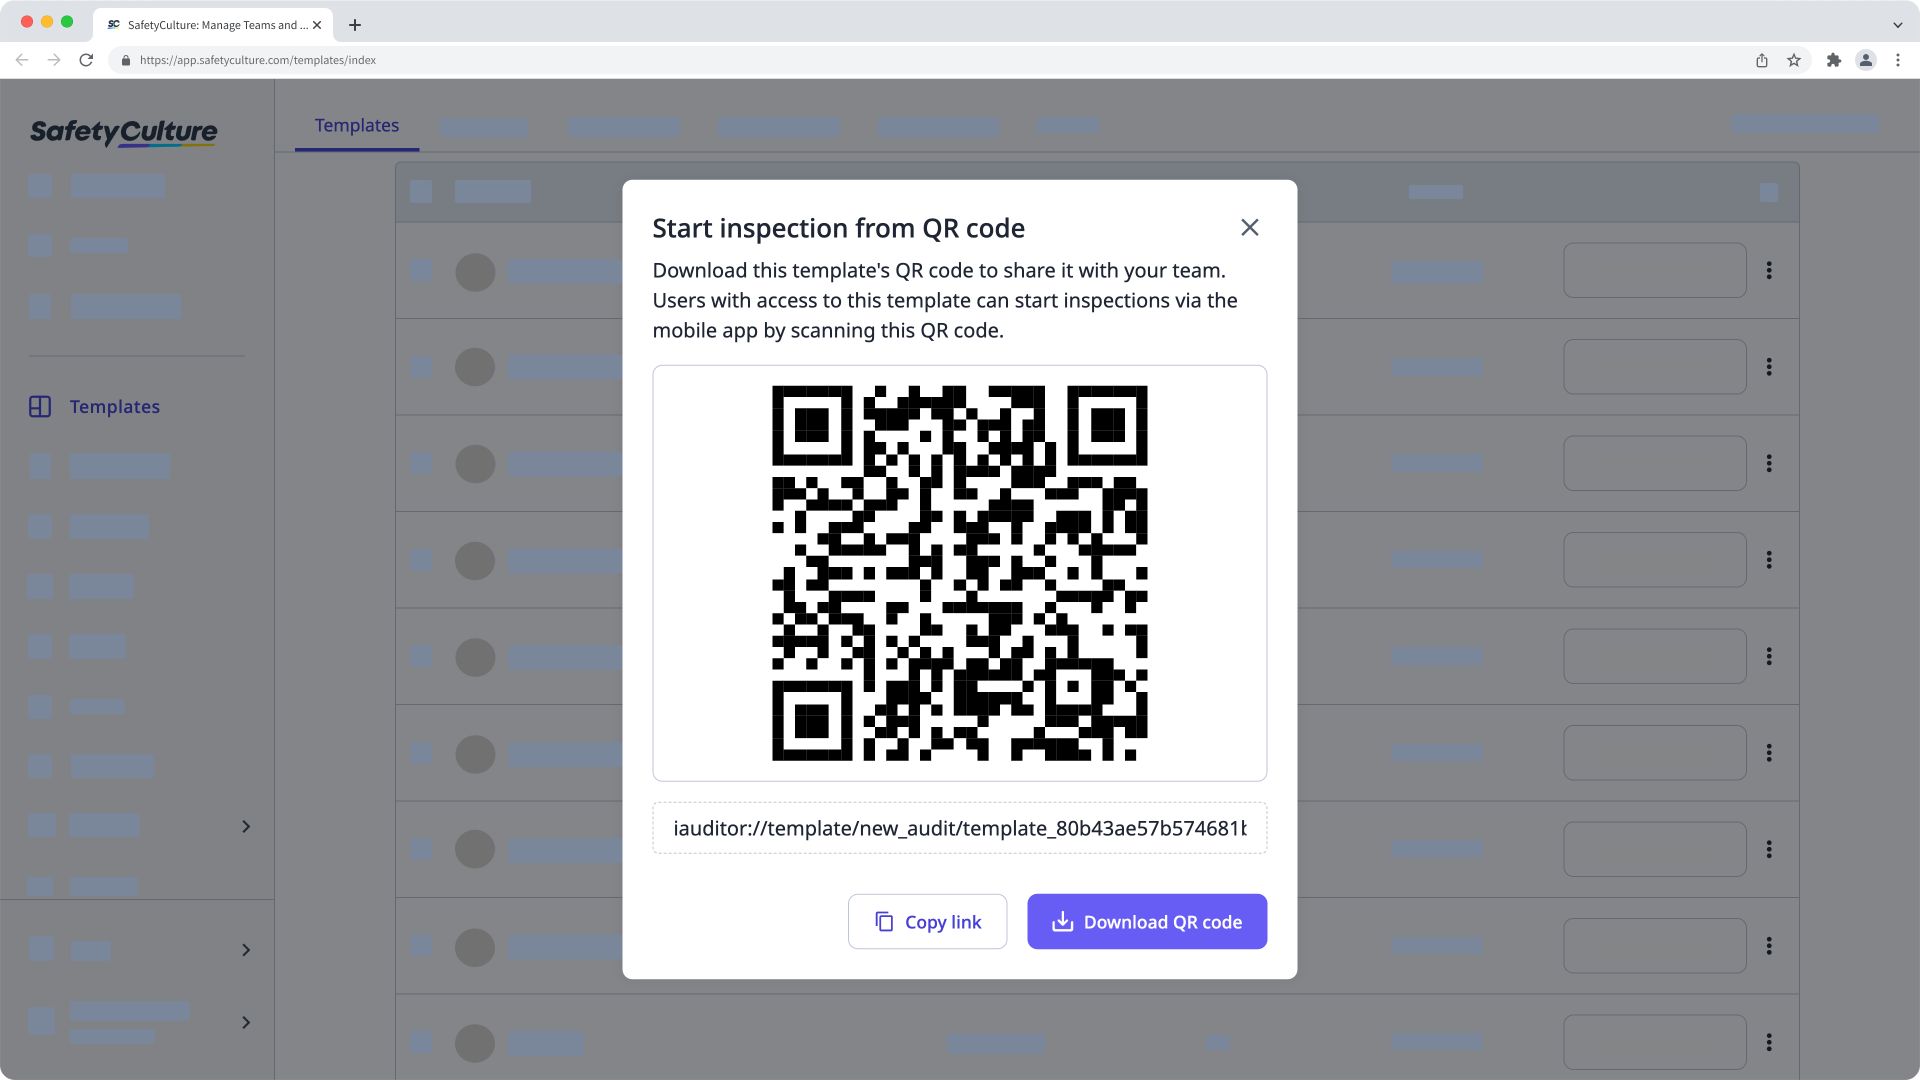 A screenshot showing how to download a 'start inspection' QR code via the web app.